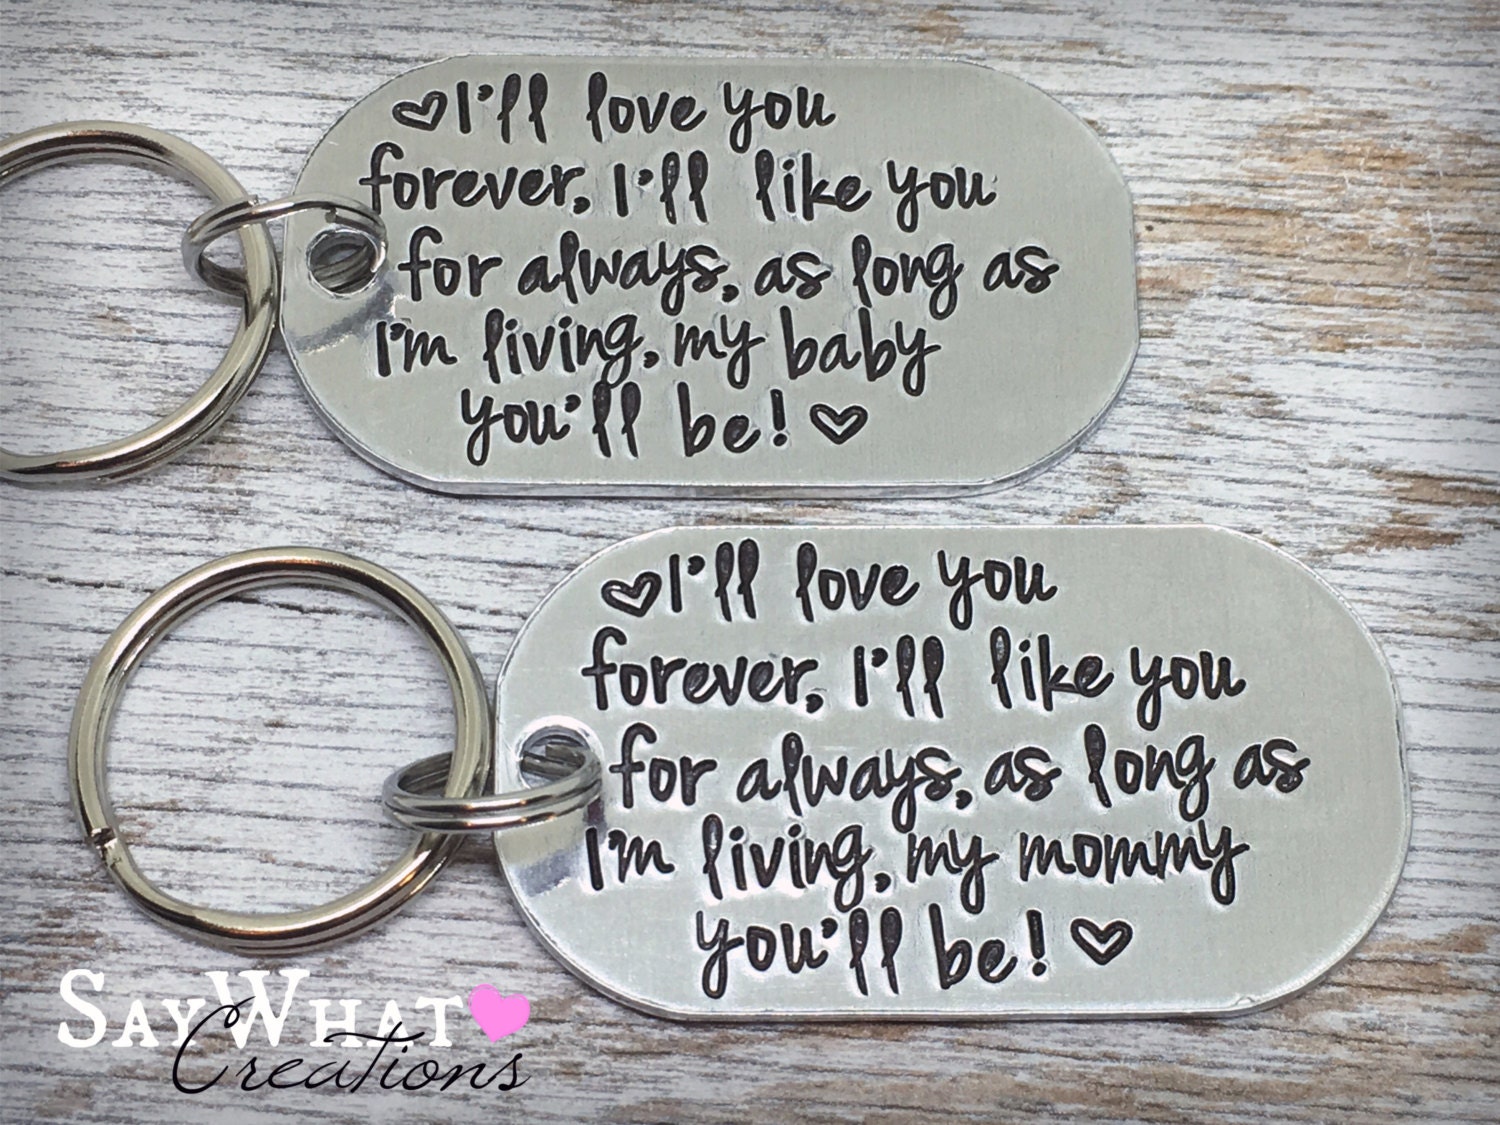 Key Chain SET "I ll love you forever I ll like you for always as long as I m living my baby you ll be" and "my mommy you ll be"